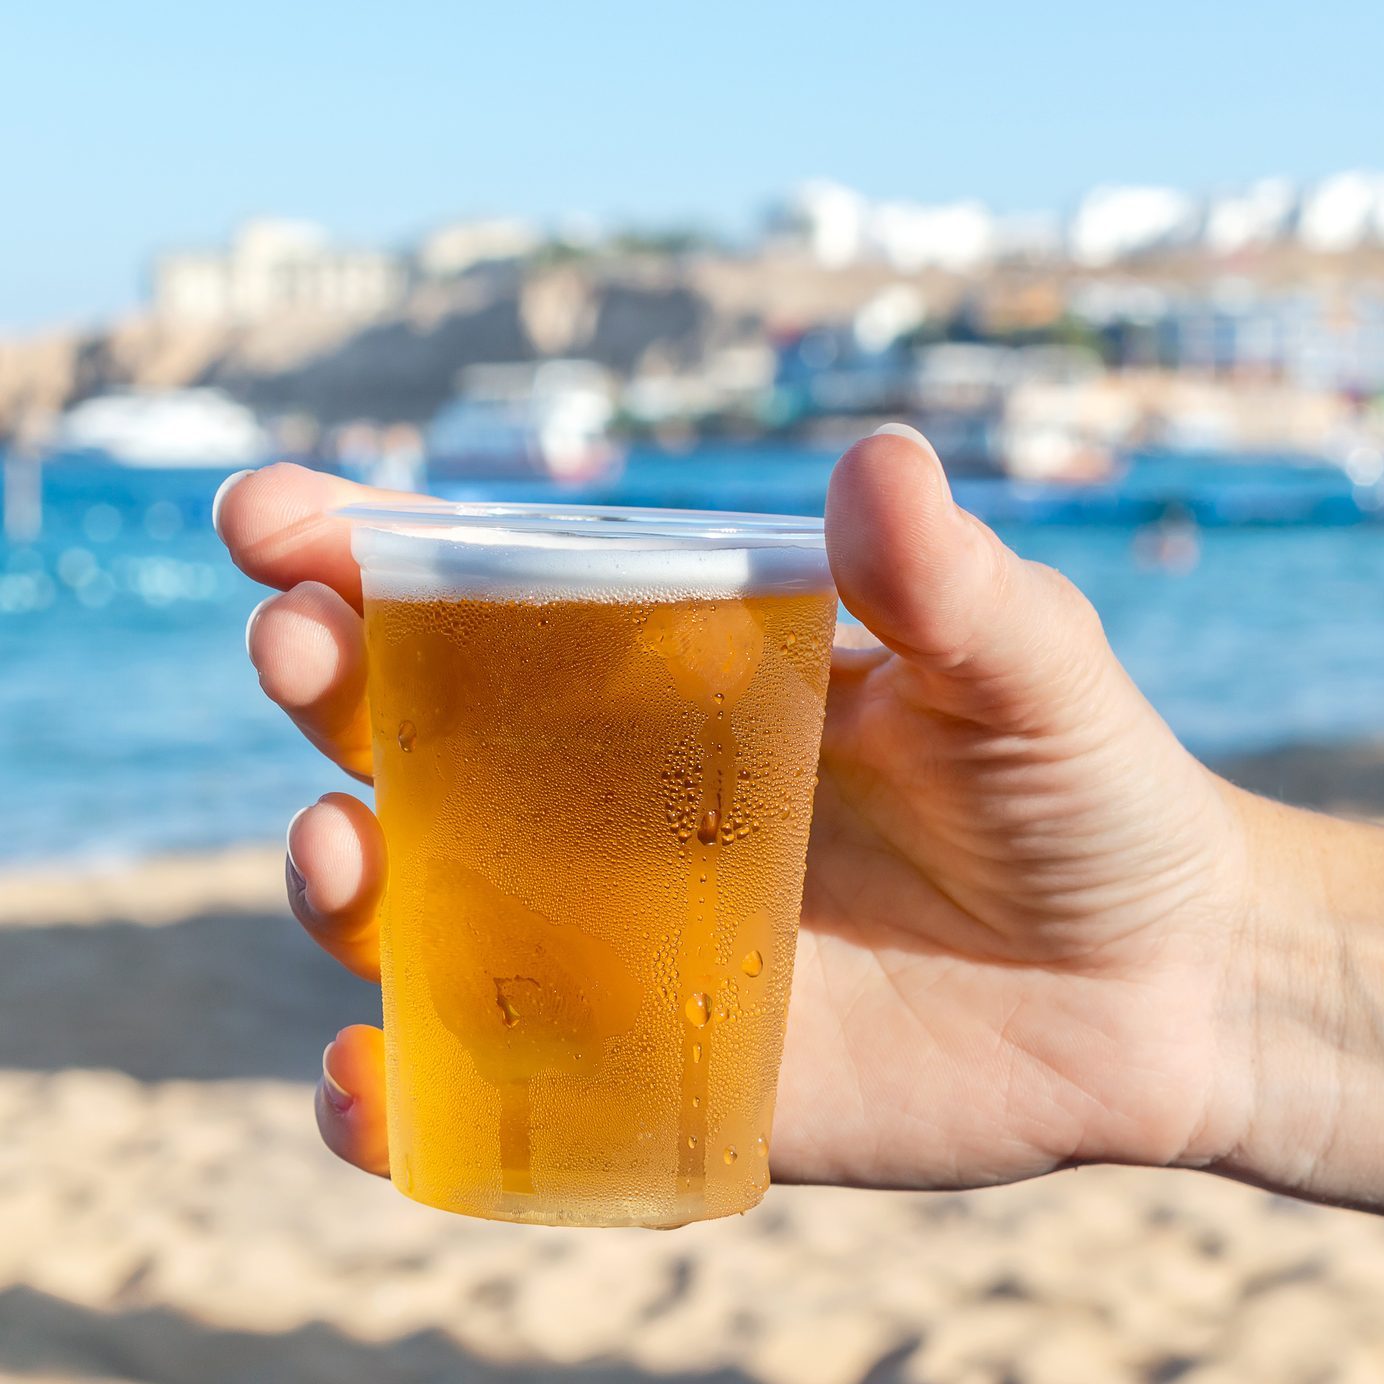 Woman's hand holding plastic glass of beer on sea beach.